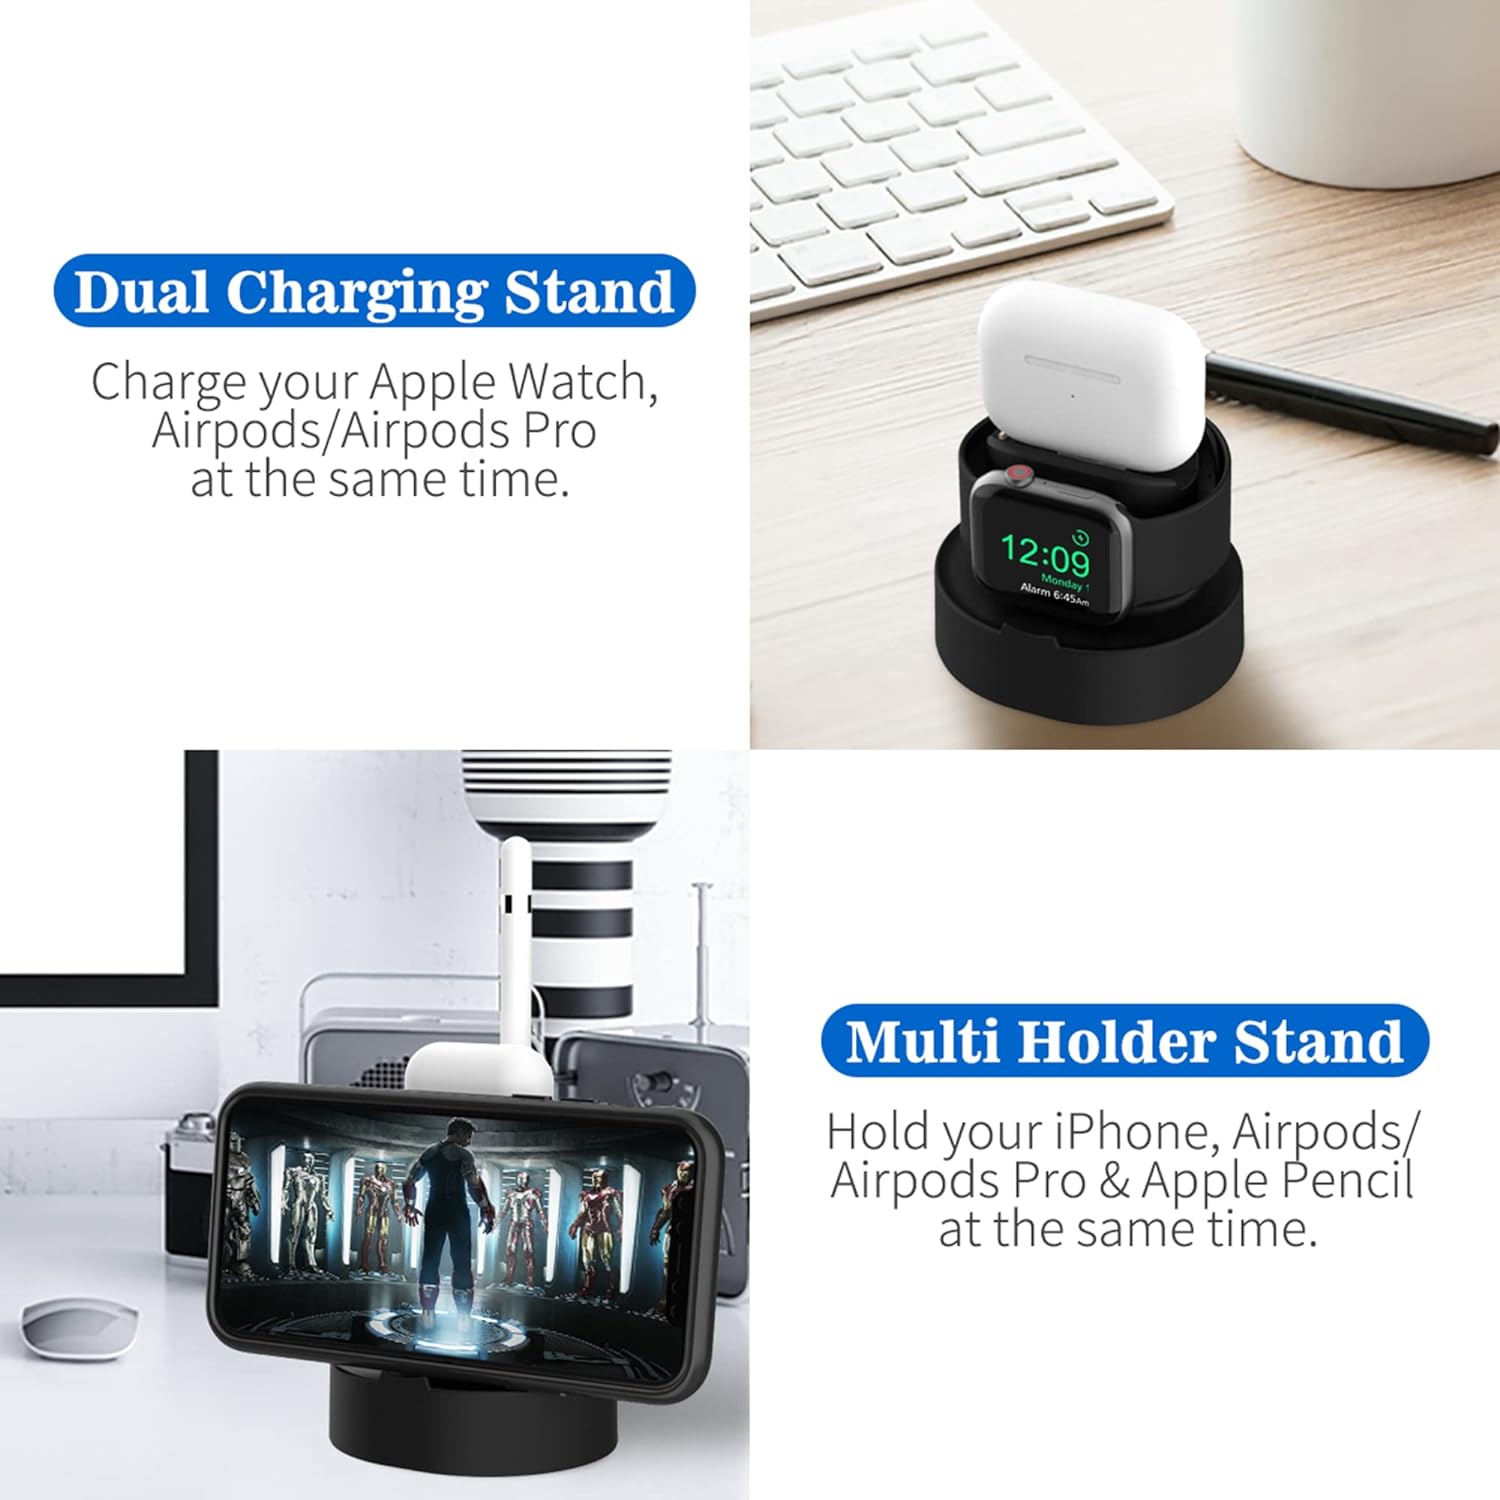 Sokusin Easy Instal Charger Stand for Apple Watch 38mm 40mm 42mm 44mm iWatch 1 2 3 4 5, Apple Watch Charging Stand Holder and Night Stand Mode, AirPods Pro Charger Dock,BlackCables NOT Included